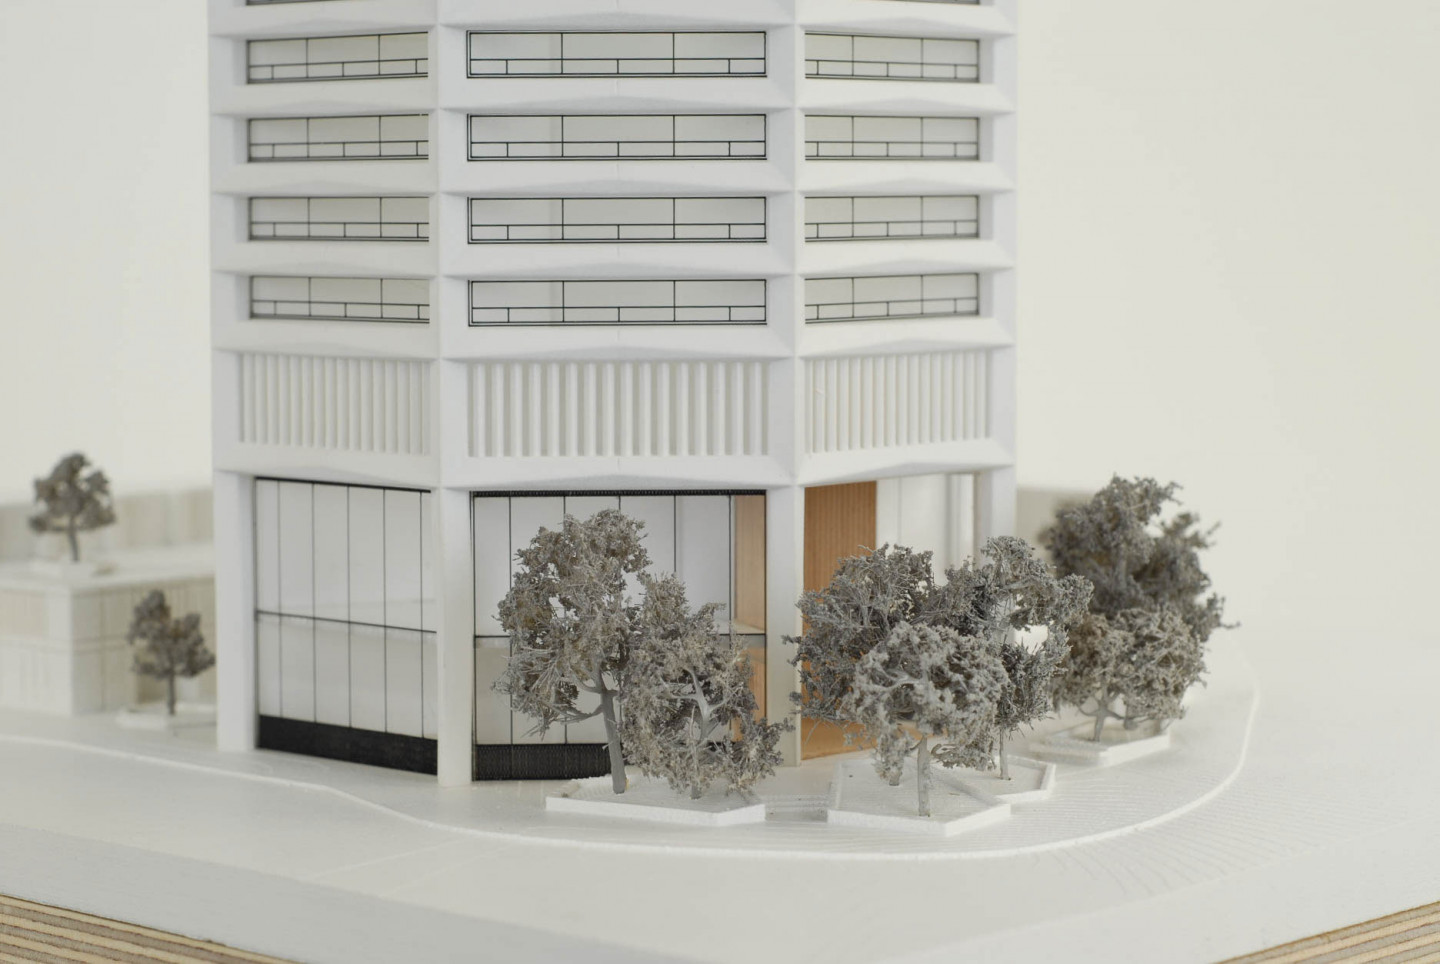 1:250 Marketing model by Glenn Howell Architects, made from laser cut, acrylic floors, resin and 3D power printed base.